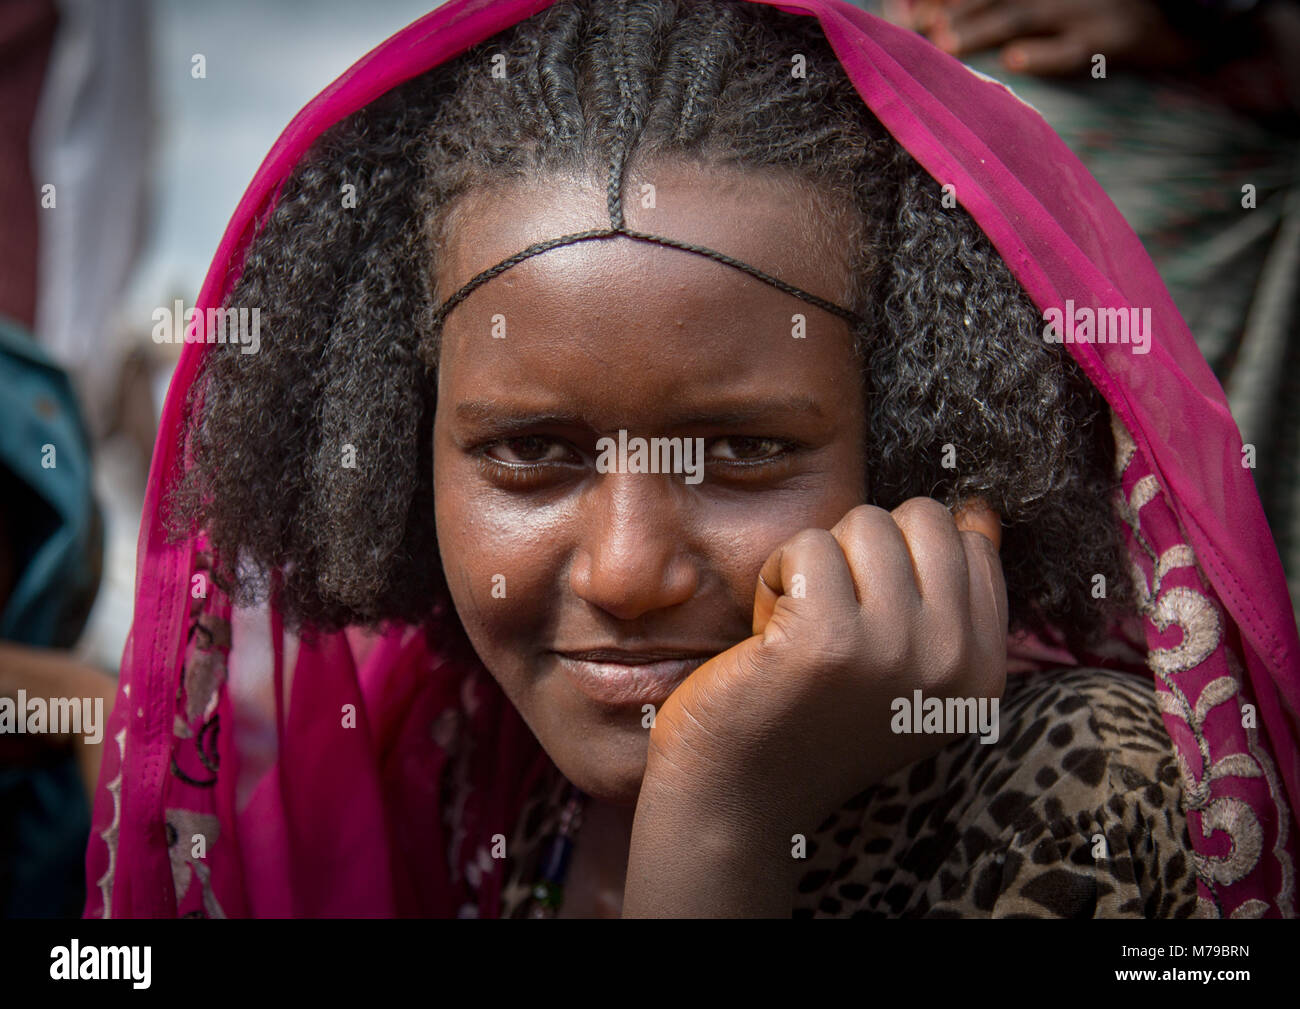 https://c8.alamy.com/comp/M79BRN/raya-tribe-woman-with-a-nice-hairstyle-and-curly-hairs-semien-wollo-M79BRN.jpg